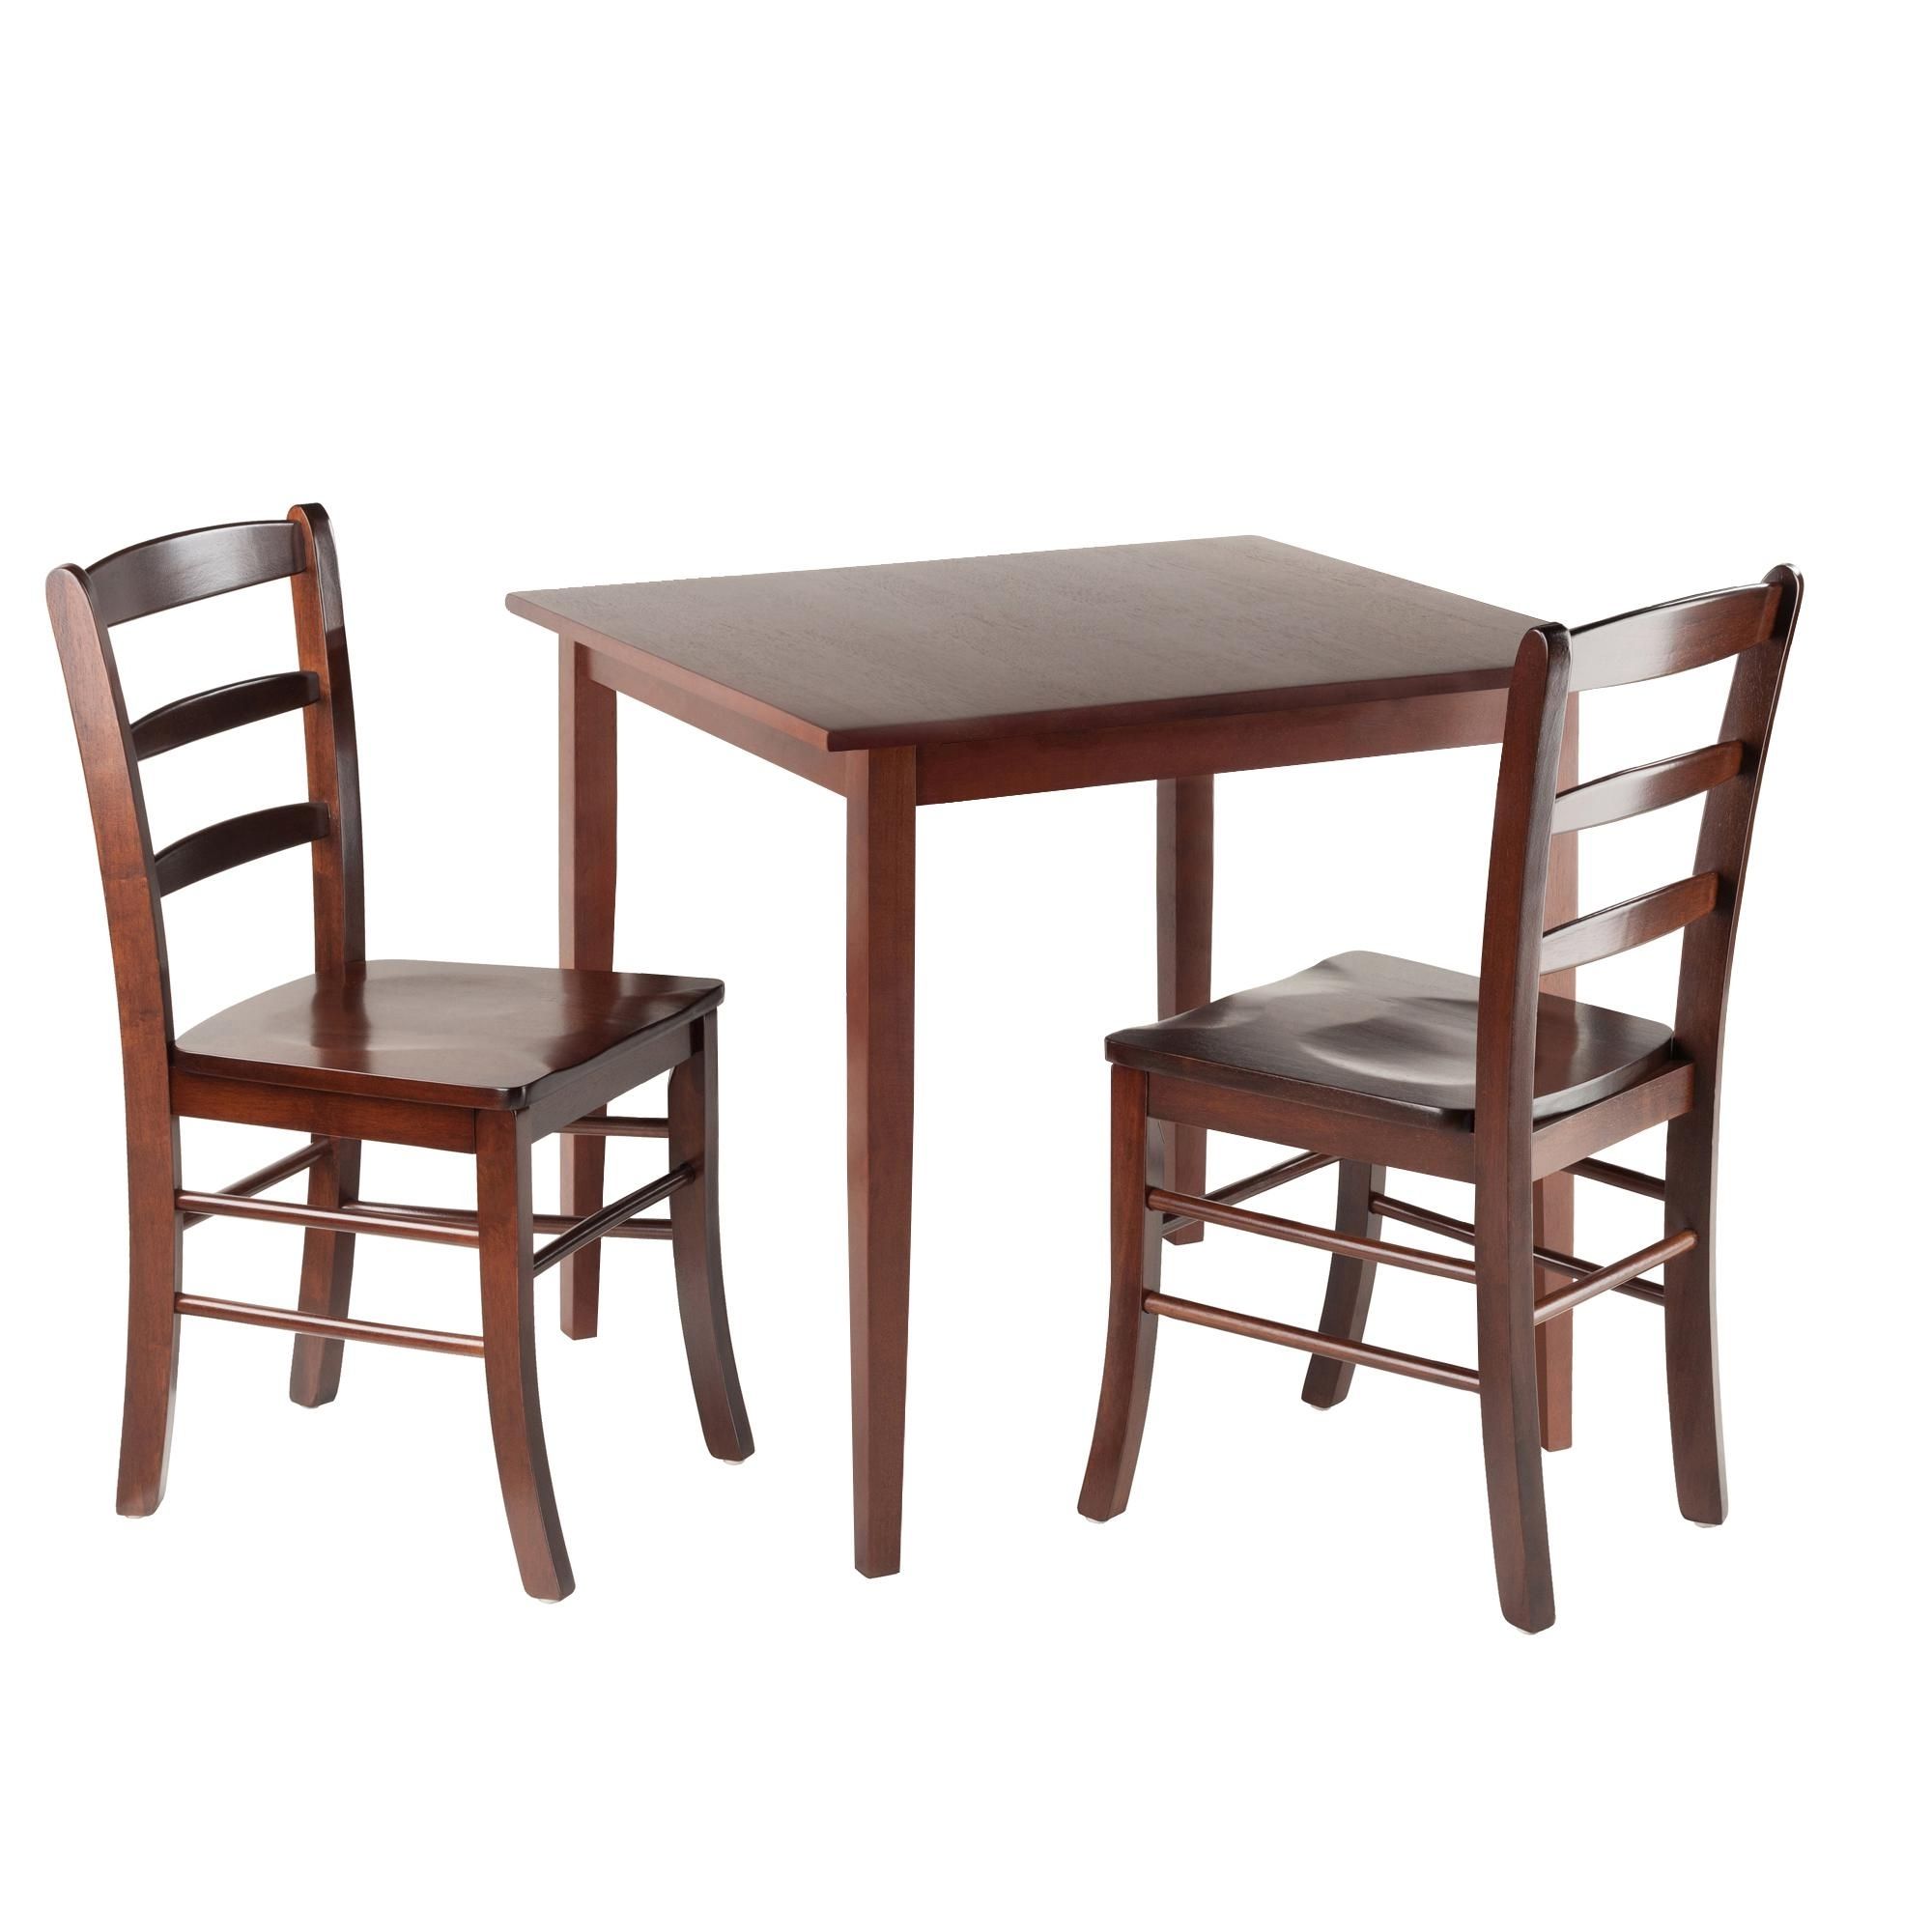 Current Small Oak Dining Tables Intended For Amazon – Winsome Groveland Square Dining Table With 2 Chairs,  (View 13 of 25)